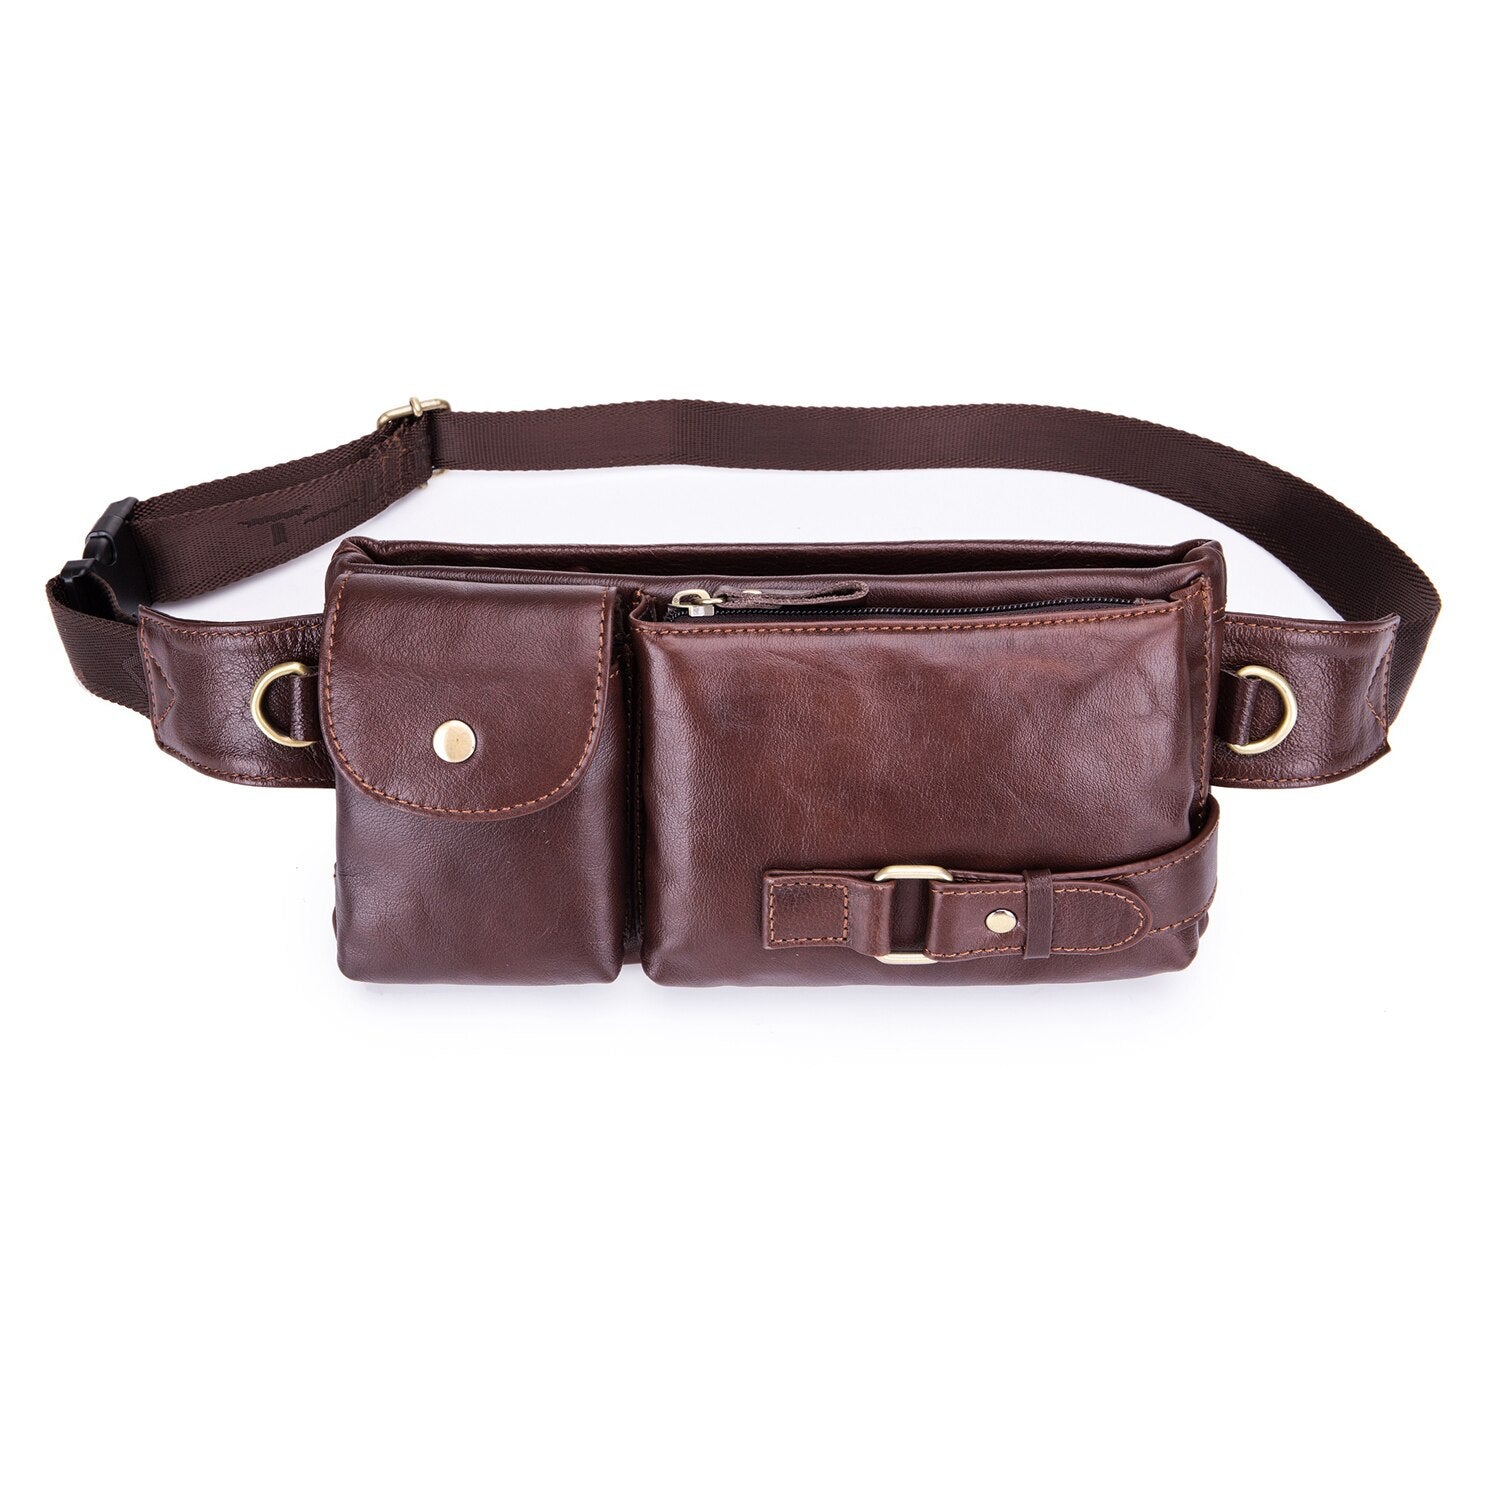 BULLCAPTAIN Genuine Leather Waist Packs Fanny Pack Belt Bag Phone leather Pouch Bags Travel Waist Pack Male Functional Wa - ebowsos